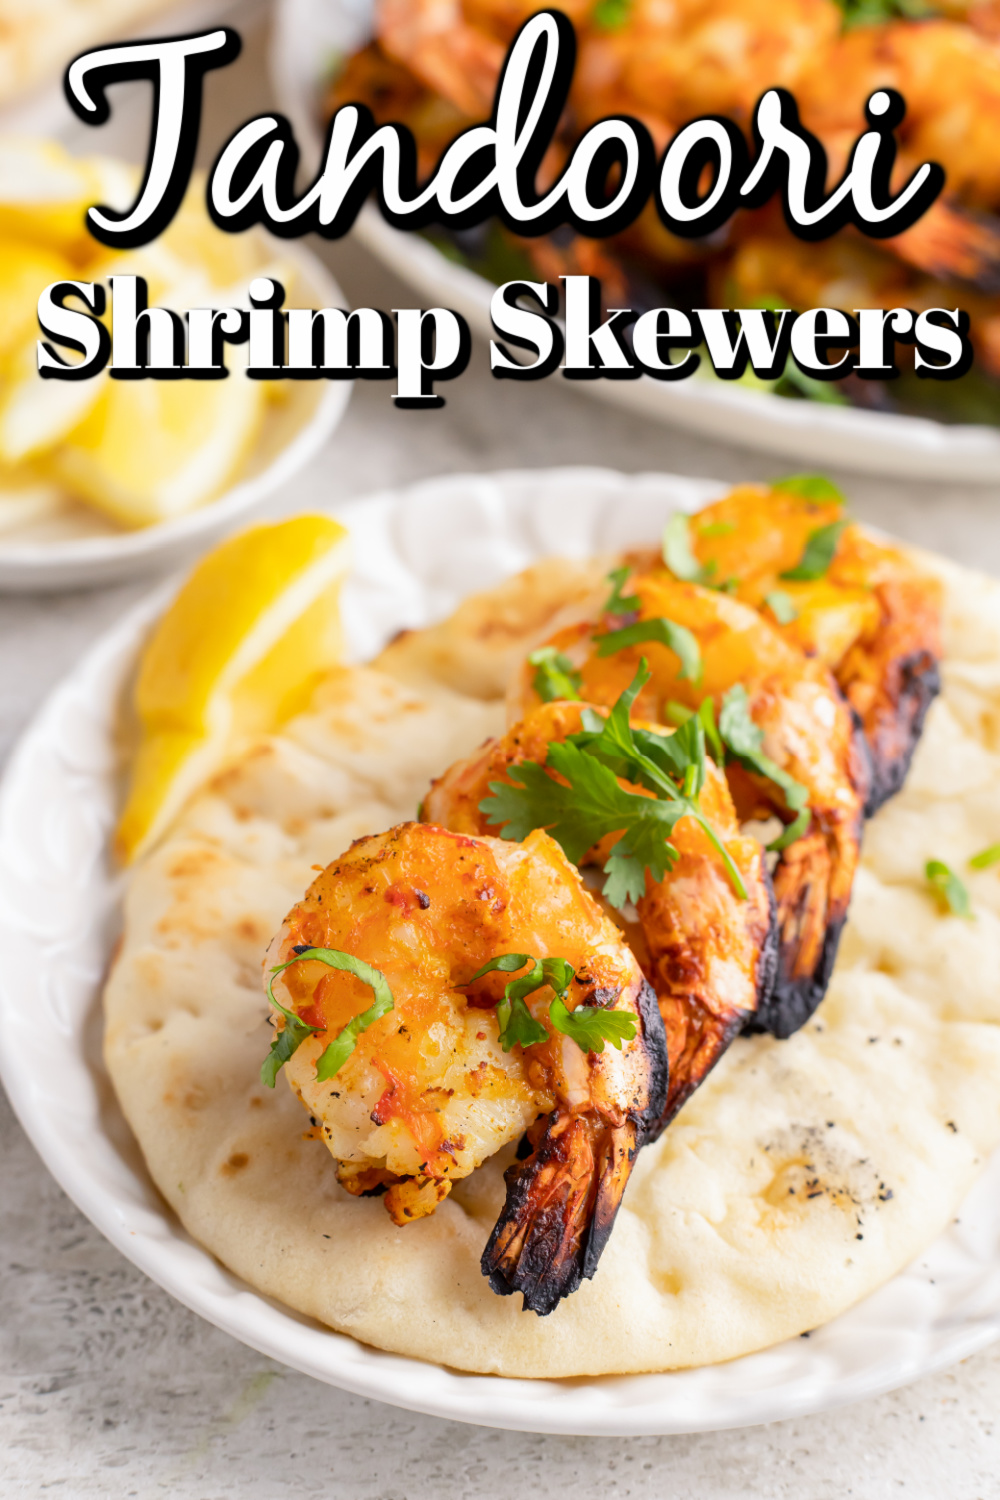 These tasty little grilled tandoori shrimp skewers are great any time. They are so easy to cook with and pair so well with all sorts of big, bold flavors!